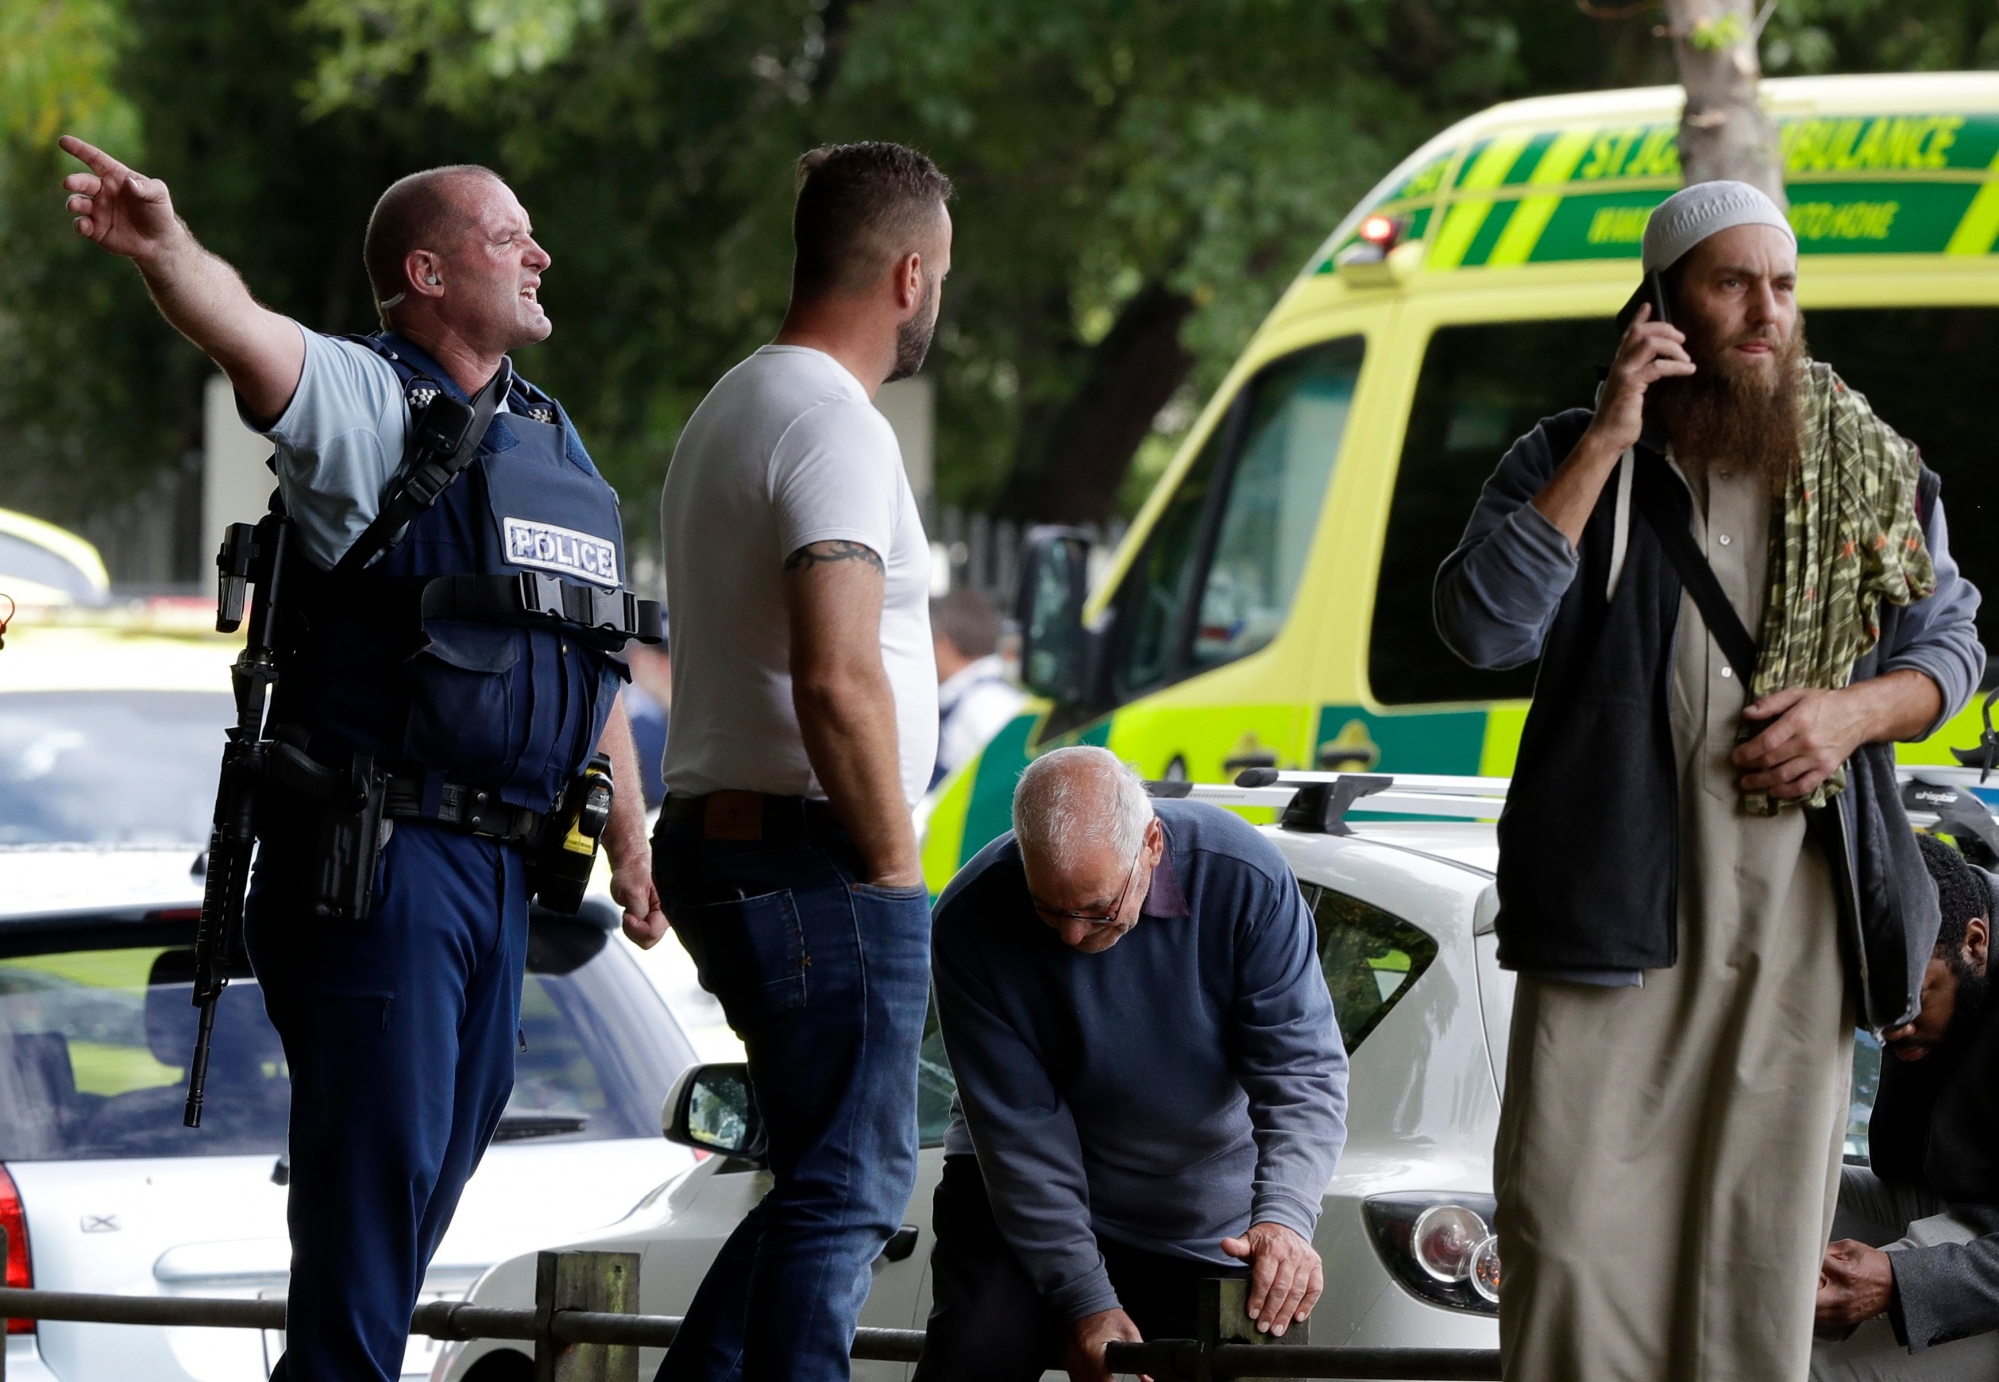 Police attempt to clear people from outside a mosque in central Christchurch, New Zealand, Friday, March 15, 2019. Many people were killed in a mass shooting at a mosque in the New Zealand city of Christchurch on Friday, a witness said. Police have not yet described the scale of the shooting but urged people in central Christchurch to stay indoors.(AP Photo/Mark Baker) New Zealand Mosque Shooting